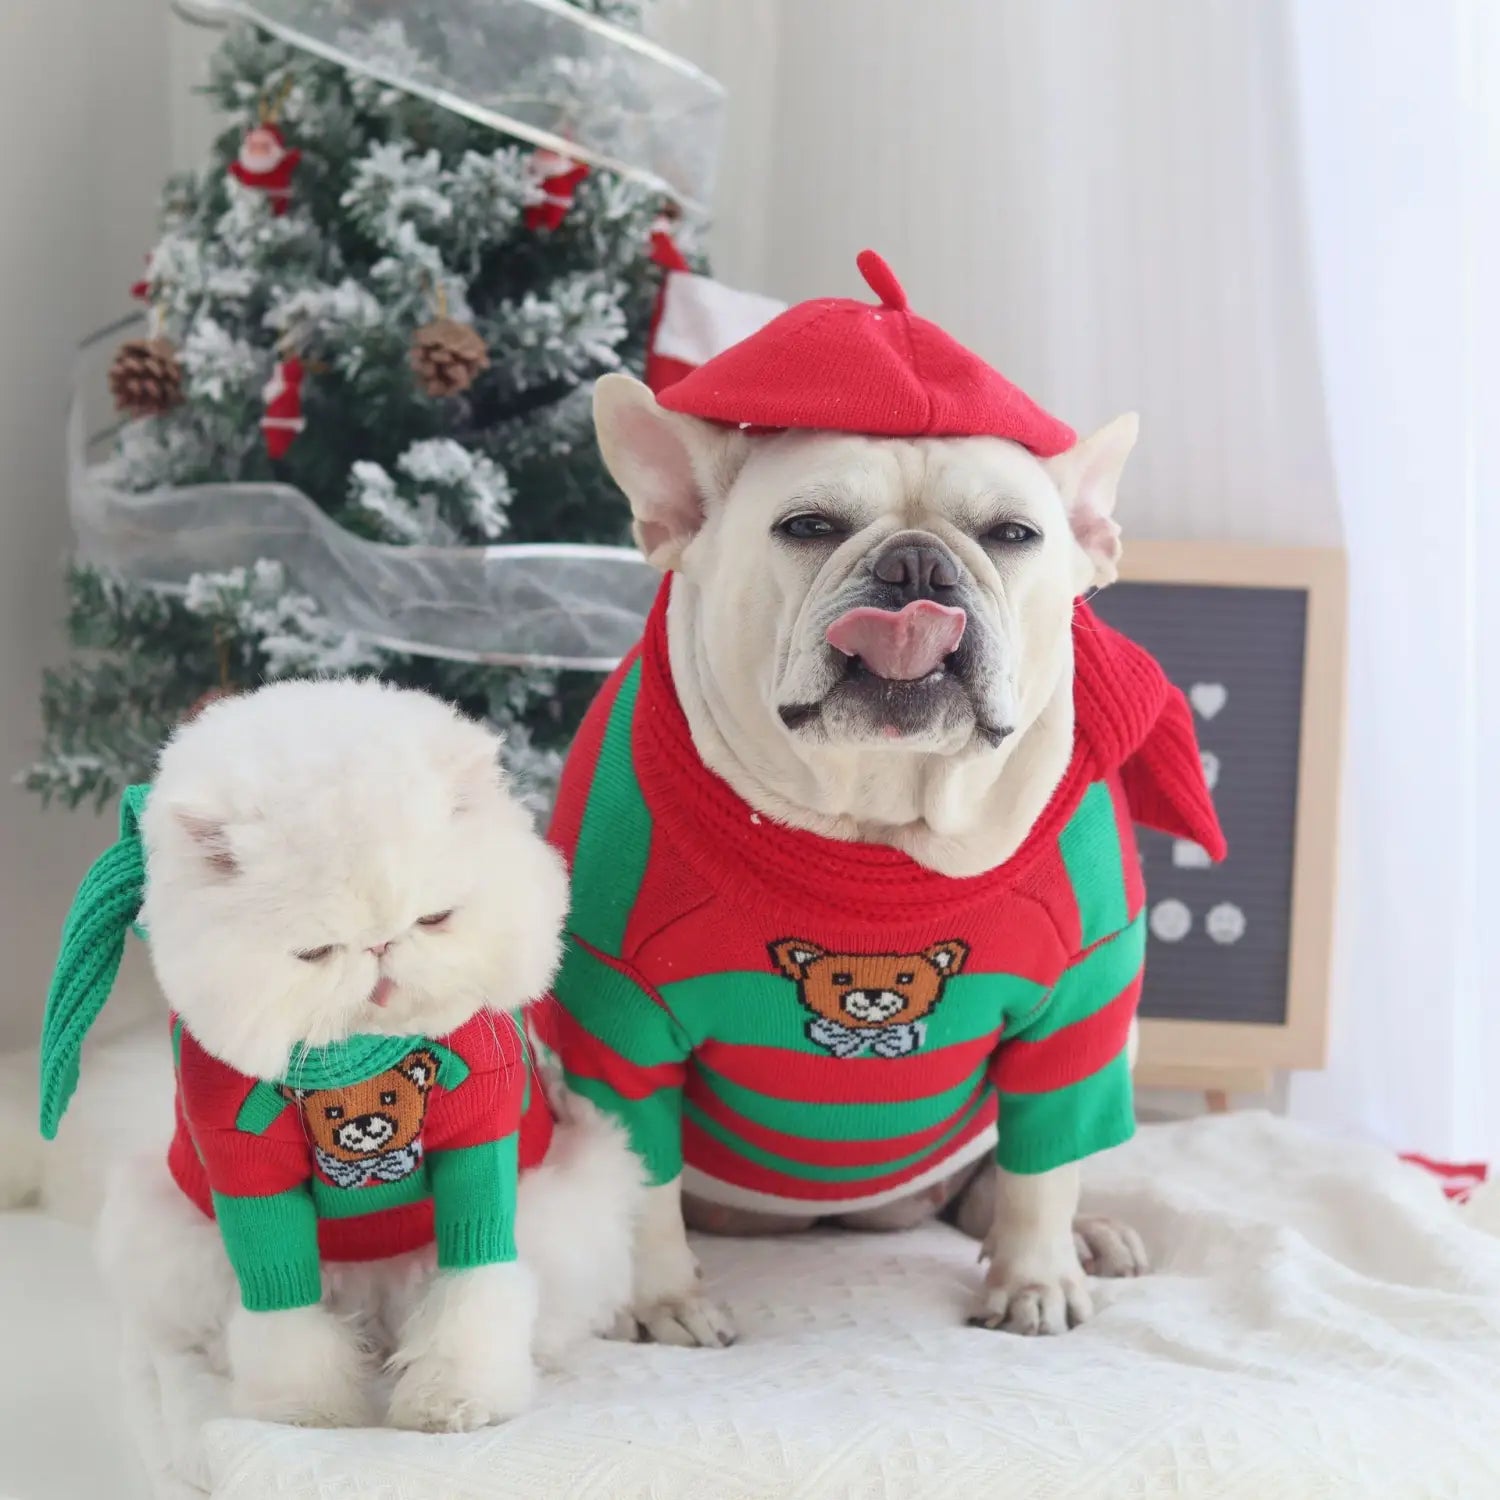 Festive Christmas Knitted Dog Sweater